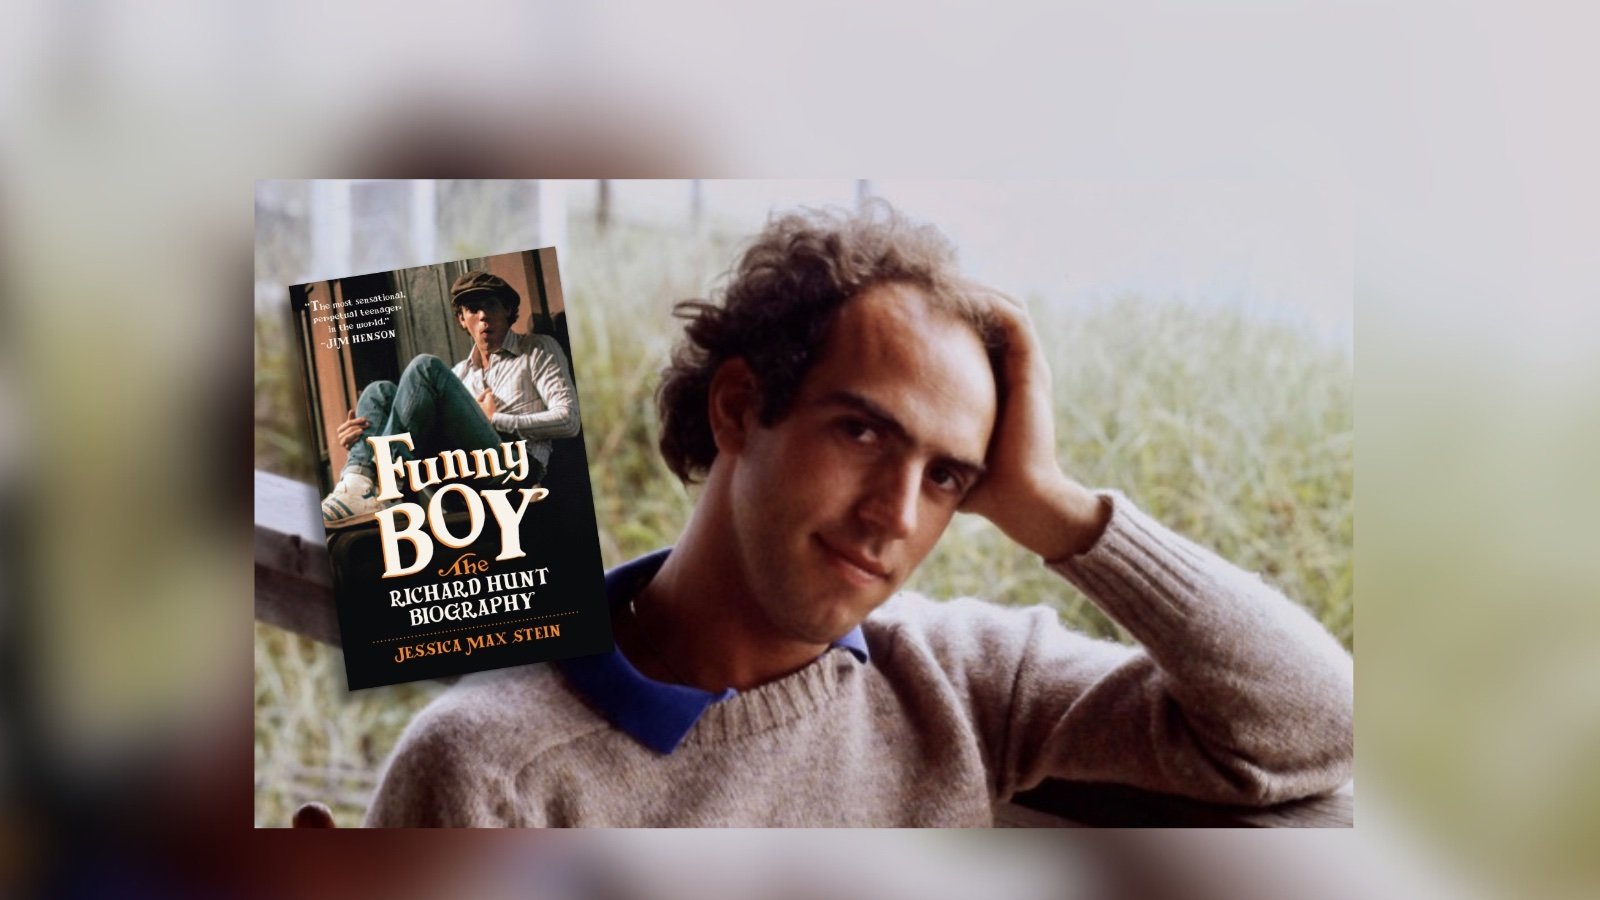 A man with curly hair, a beige sweater and blue shirt underneath poking through the collar, sits with his hand propping up his head, smiling mildly. Next to him is a floating image of a book titled FUNNY BOY: THE RICHARD HUNT BIOGRAPHY